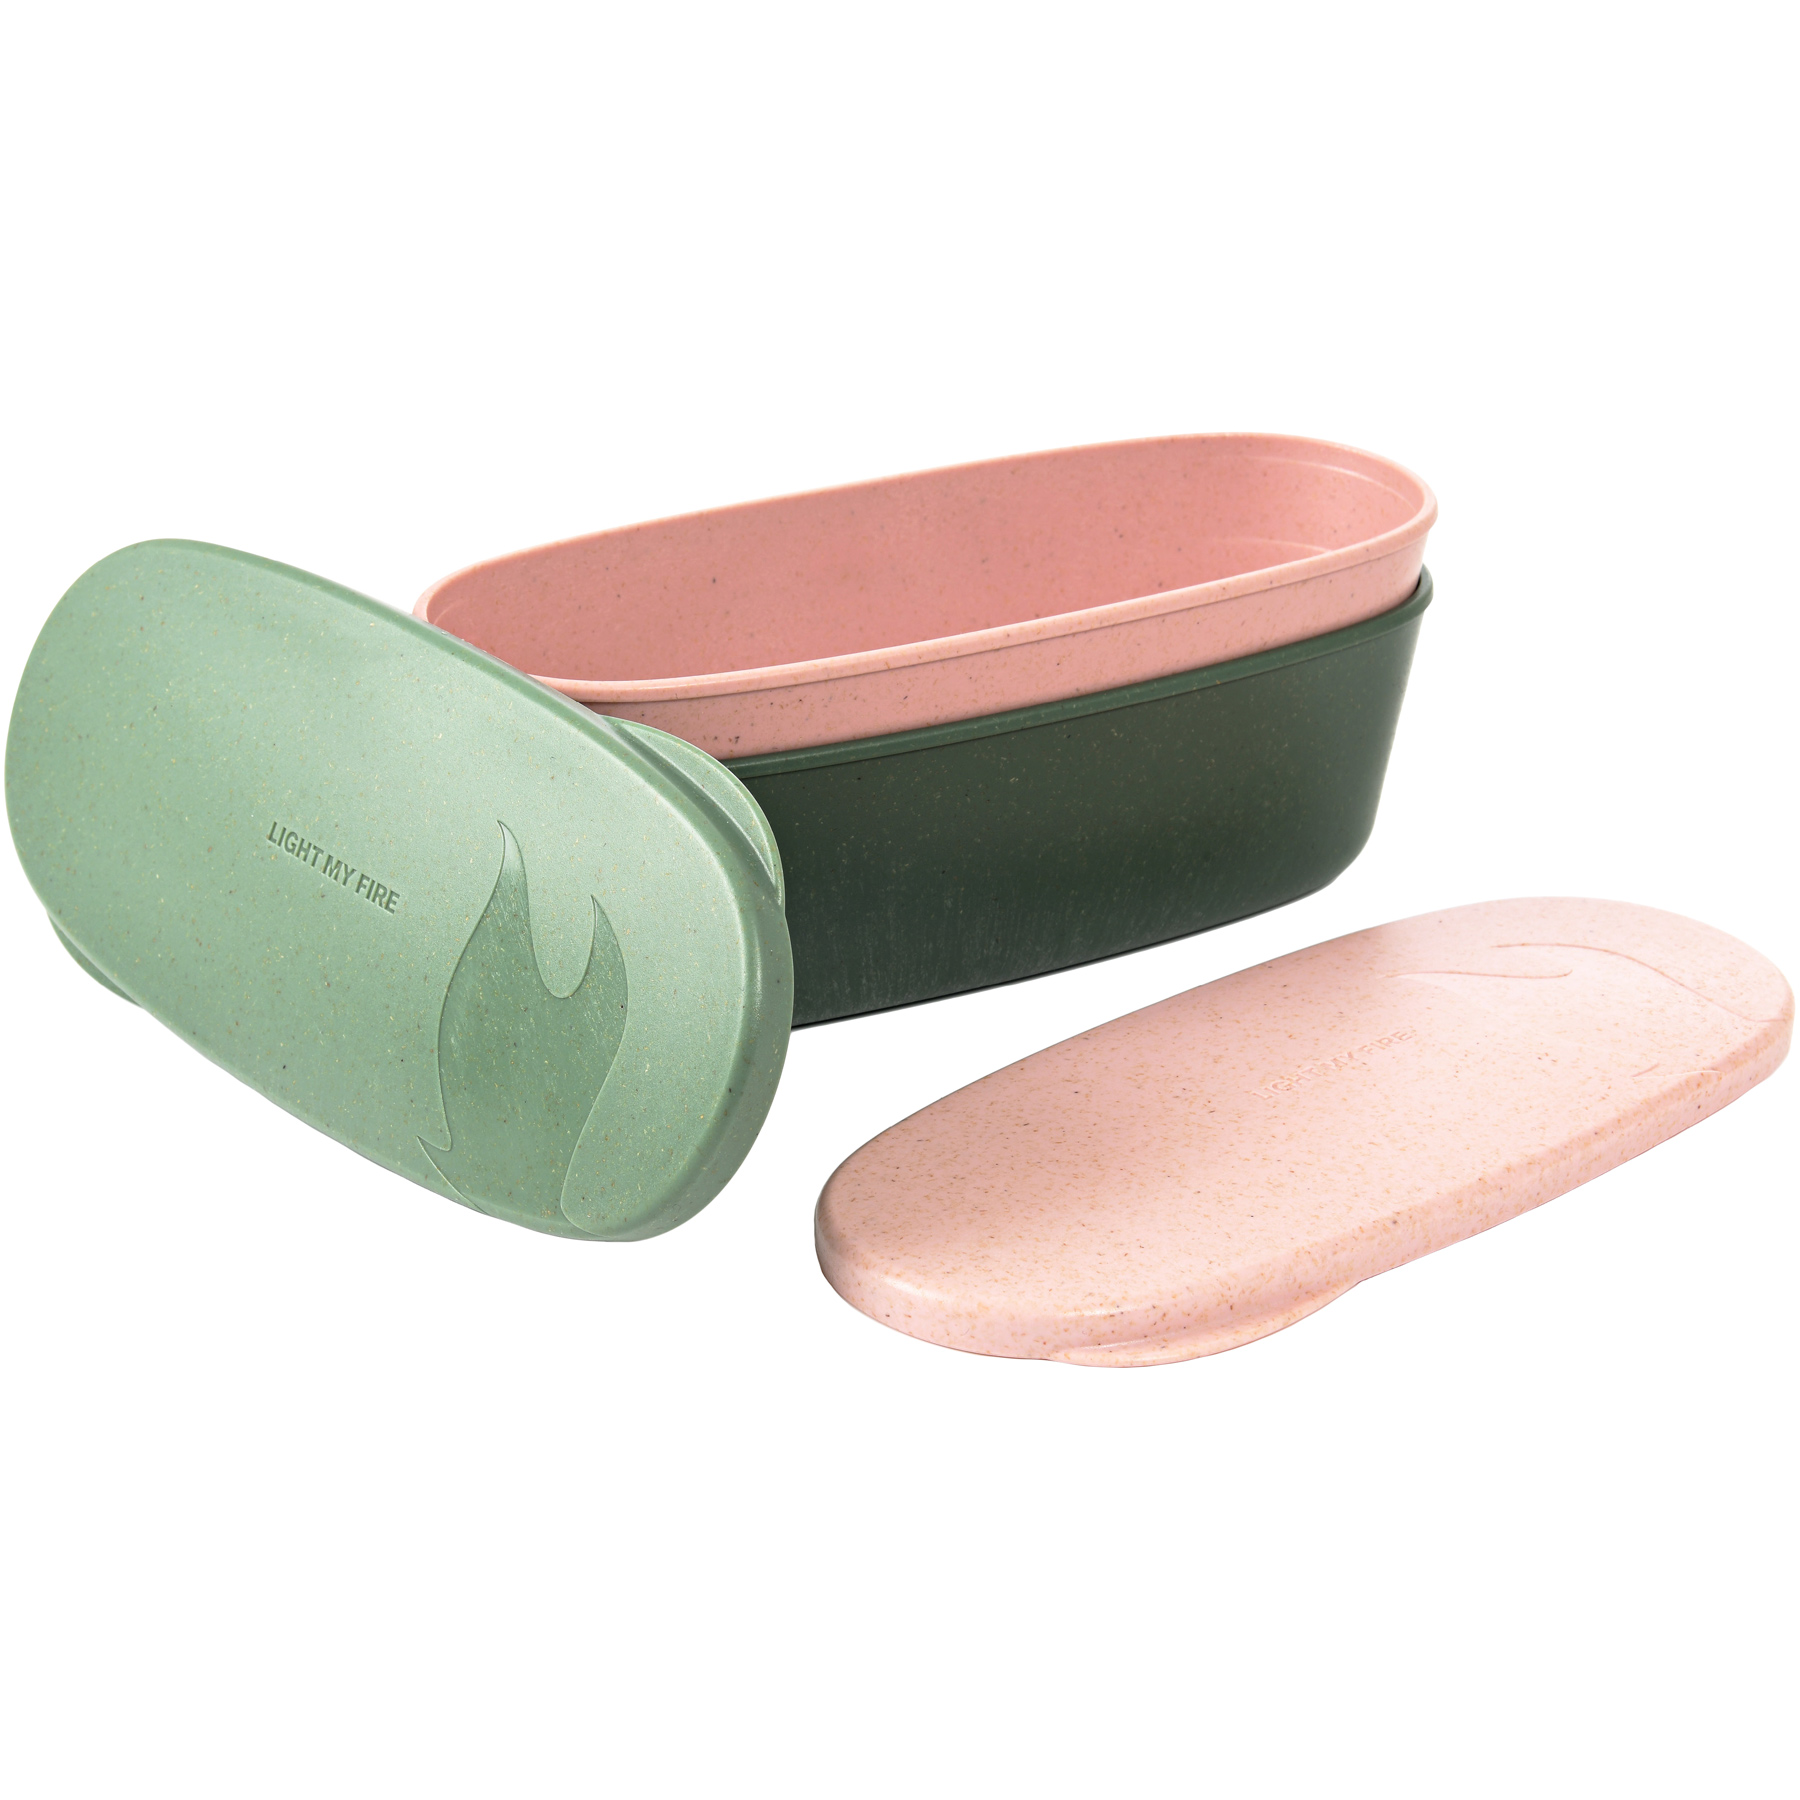 Picture of Light My Fire SnapBox Oval BIO 2 Pack - sandygreen/dustypink